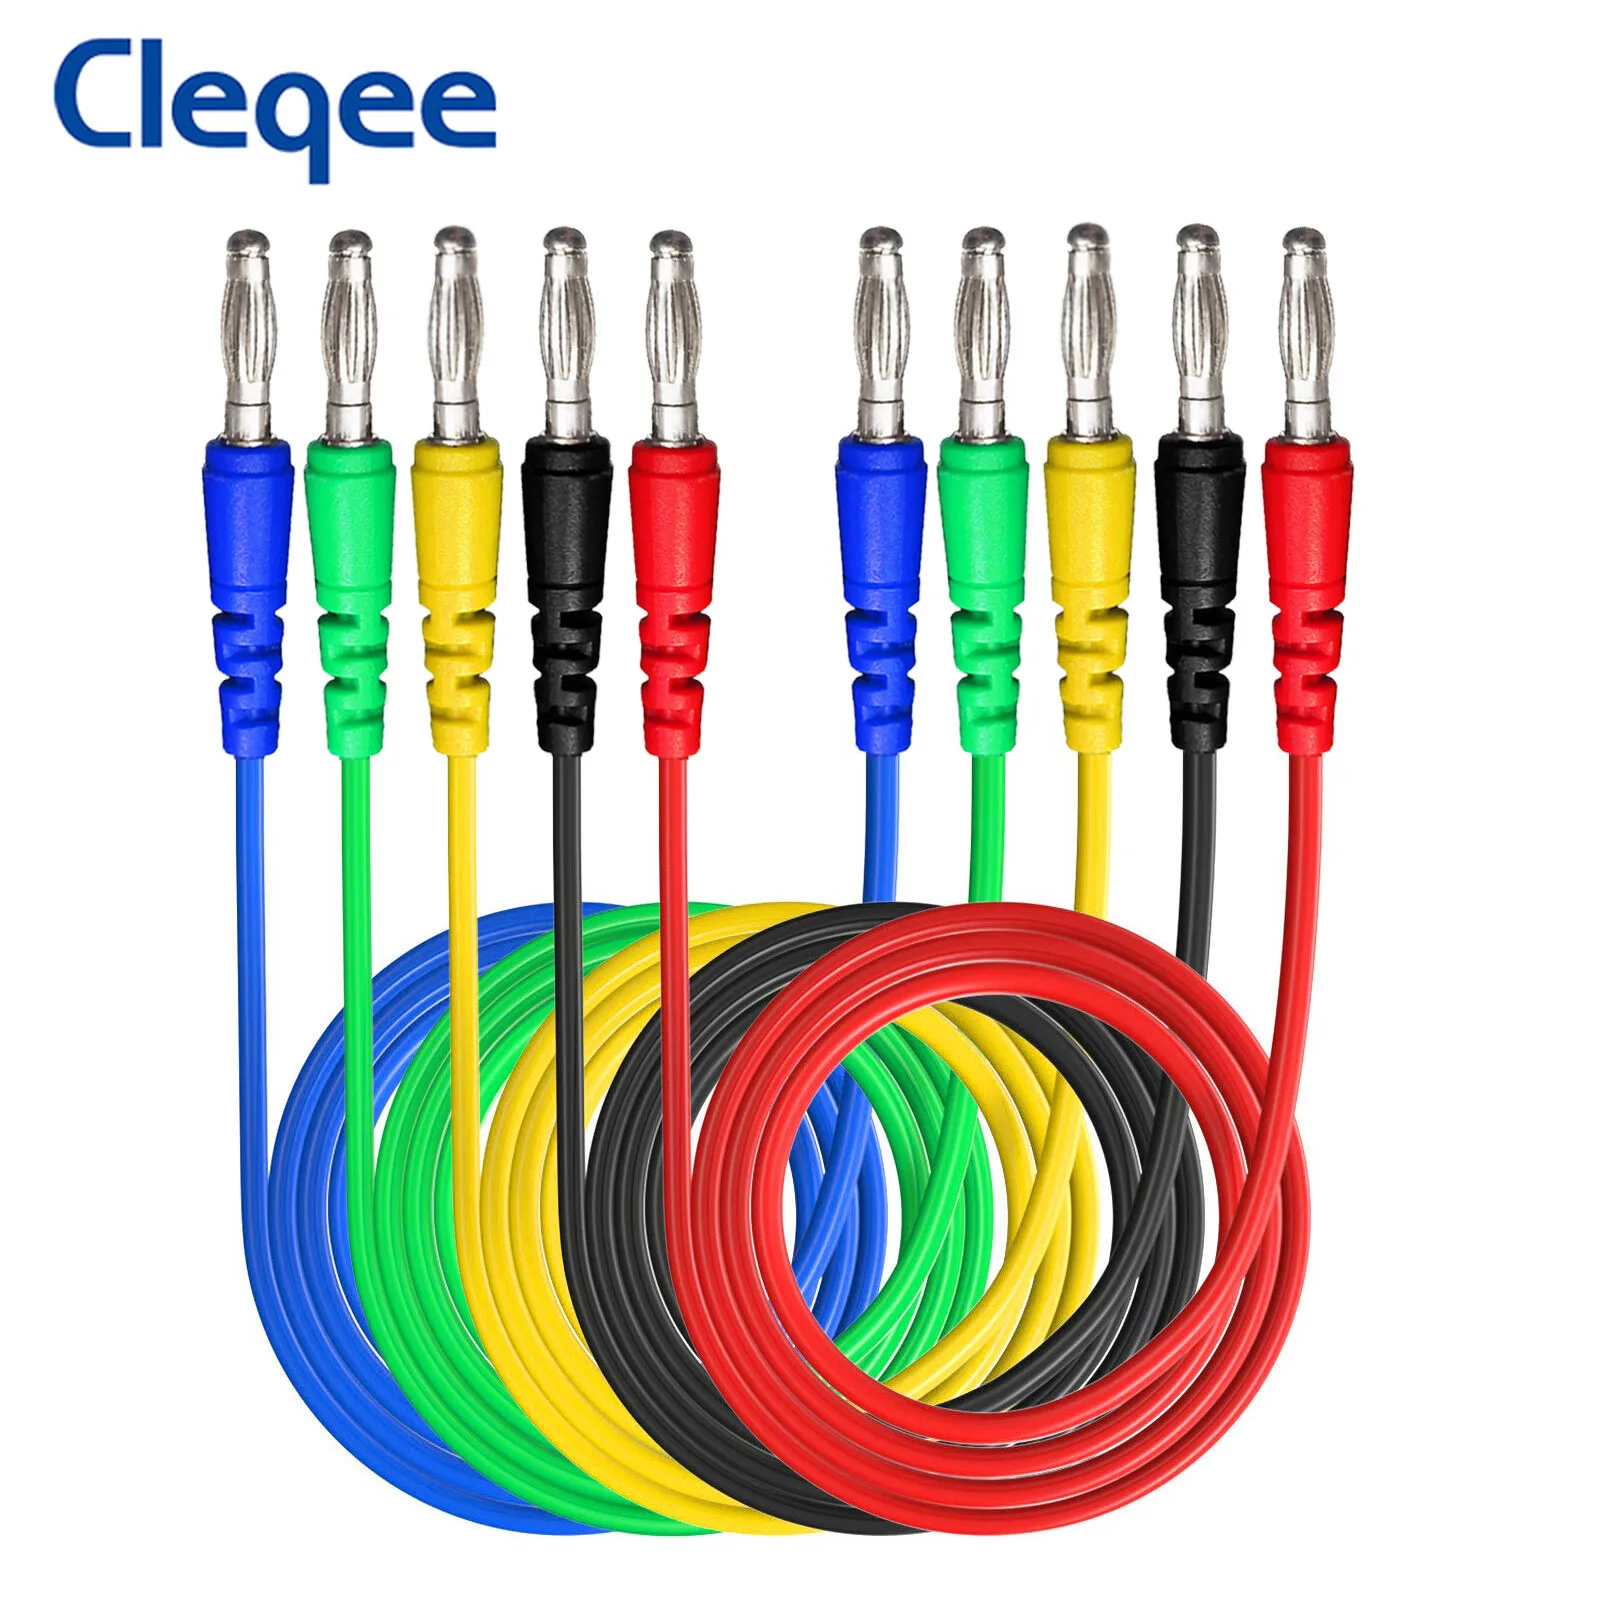 Cleqee P1043  Dual 4mm Copper Banana Plug Multimeter Test Leads Insulated PVC 1000V/10A 1M Wire Cable Bare Plug DIY